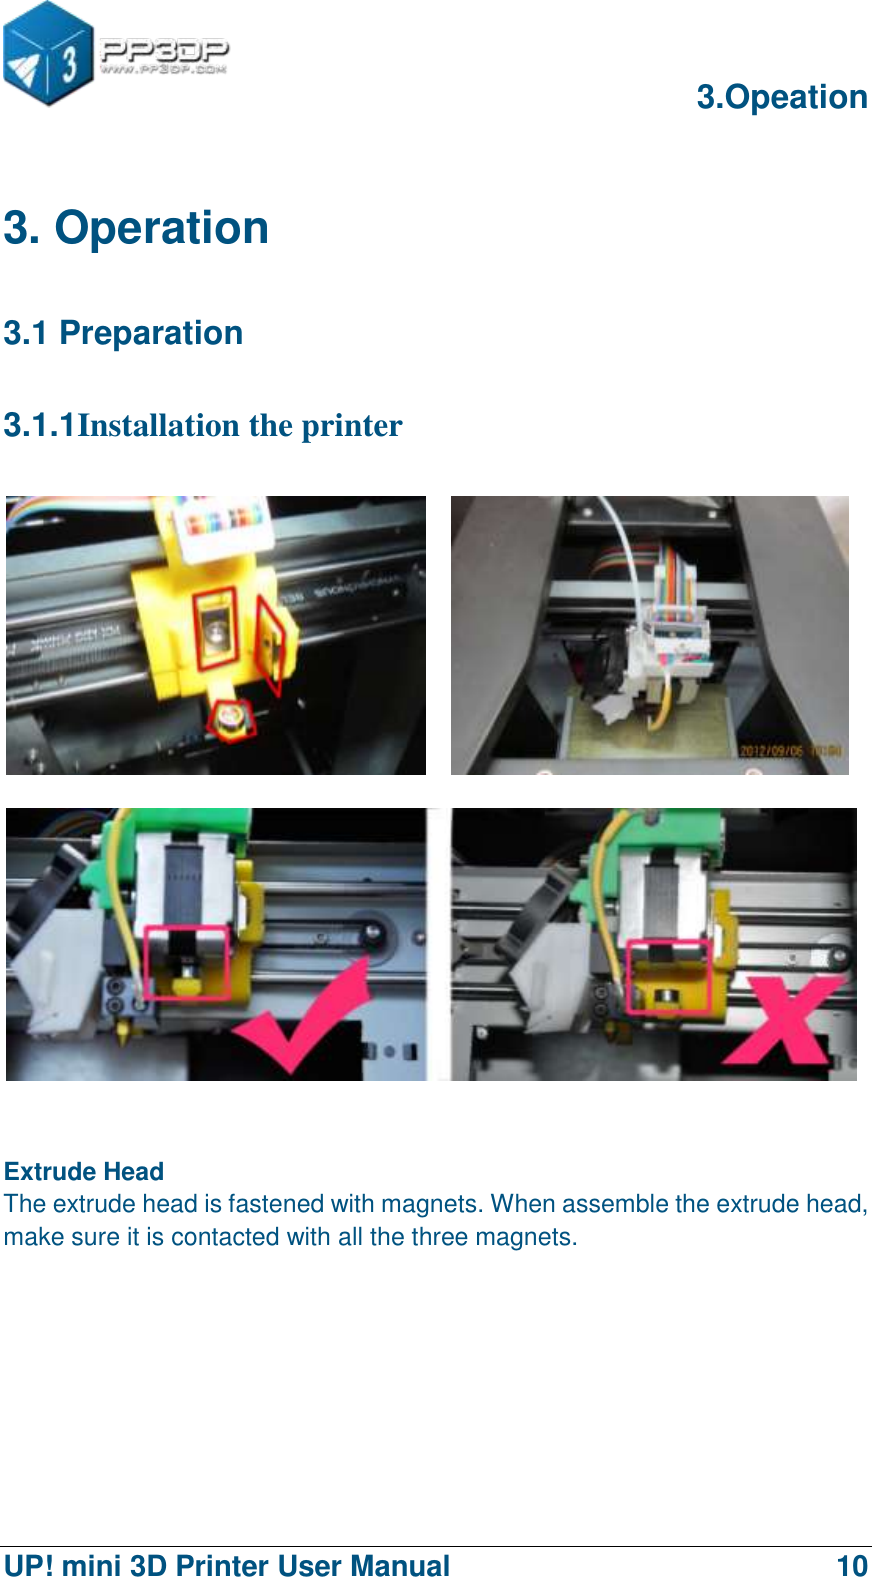      3.Opeation  UP! mini 3D Printer User Manual                                10  3. Operation 3.1 Preparation 3.1.1Installation the printer        Extrude Head The extrude head is fastened with magnets. When assemble the extrude head, make sure it is contacted with all the three magnets. 